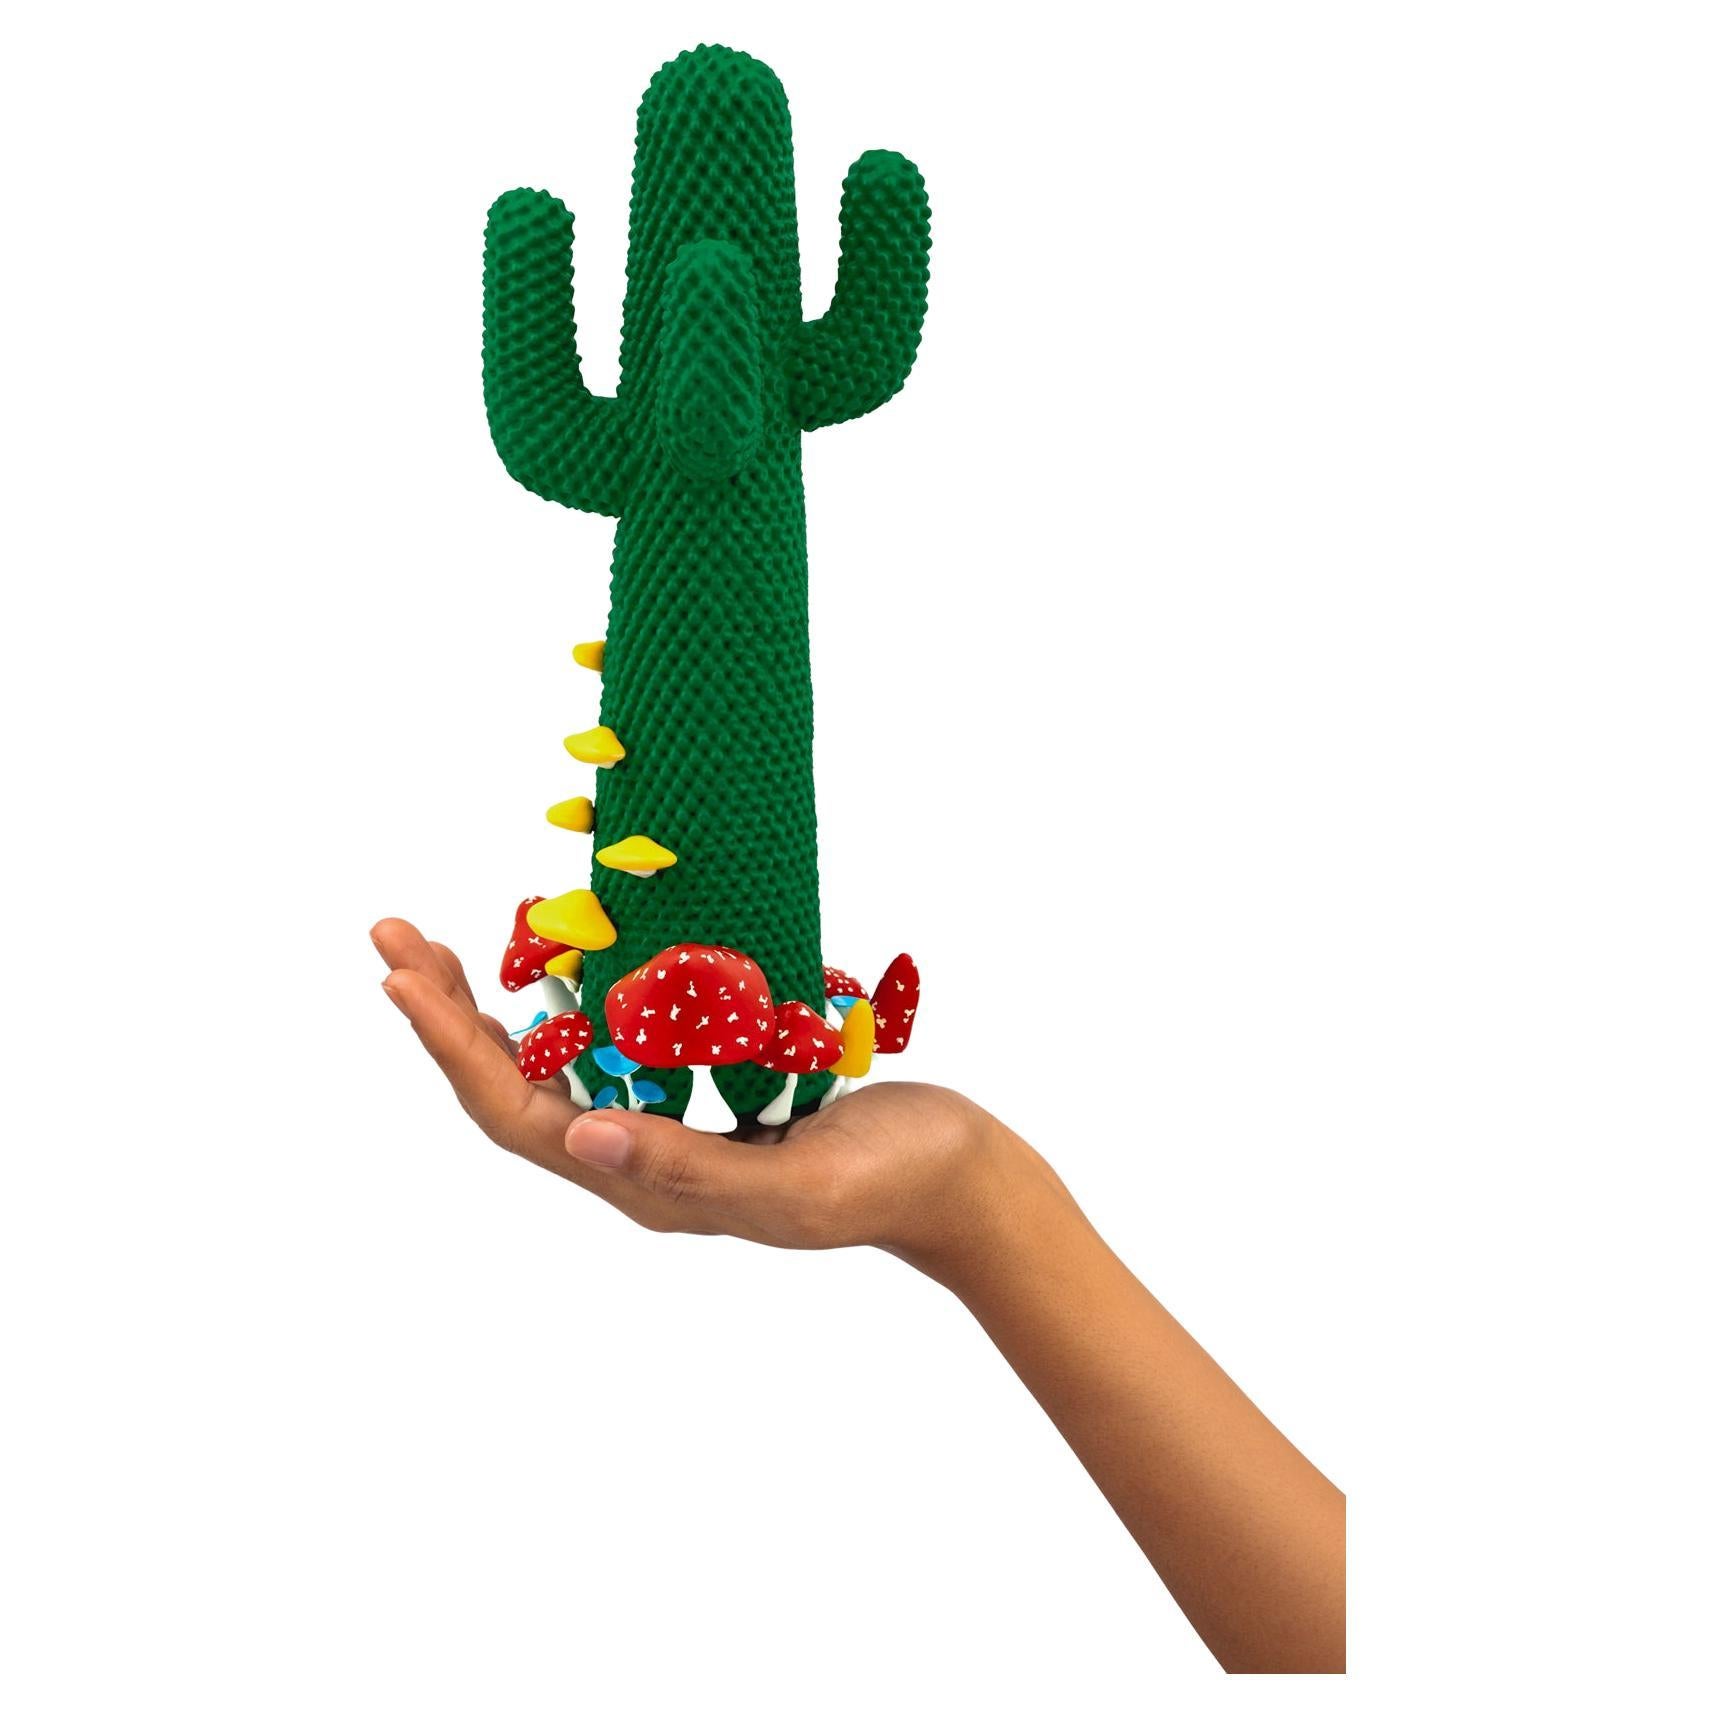 Limited Edition #53/99

Gufram presents the miniaturised version of the Shroom CACTUS® created in collaboration with A$AP Rocky and the artist’s new design studio HOMMEMADE Exactly as the real-size Shroom CACTUS®, the new Guframini piece features